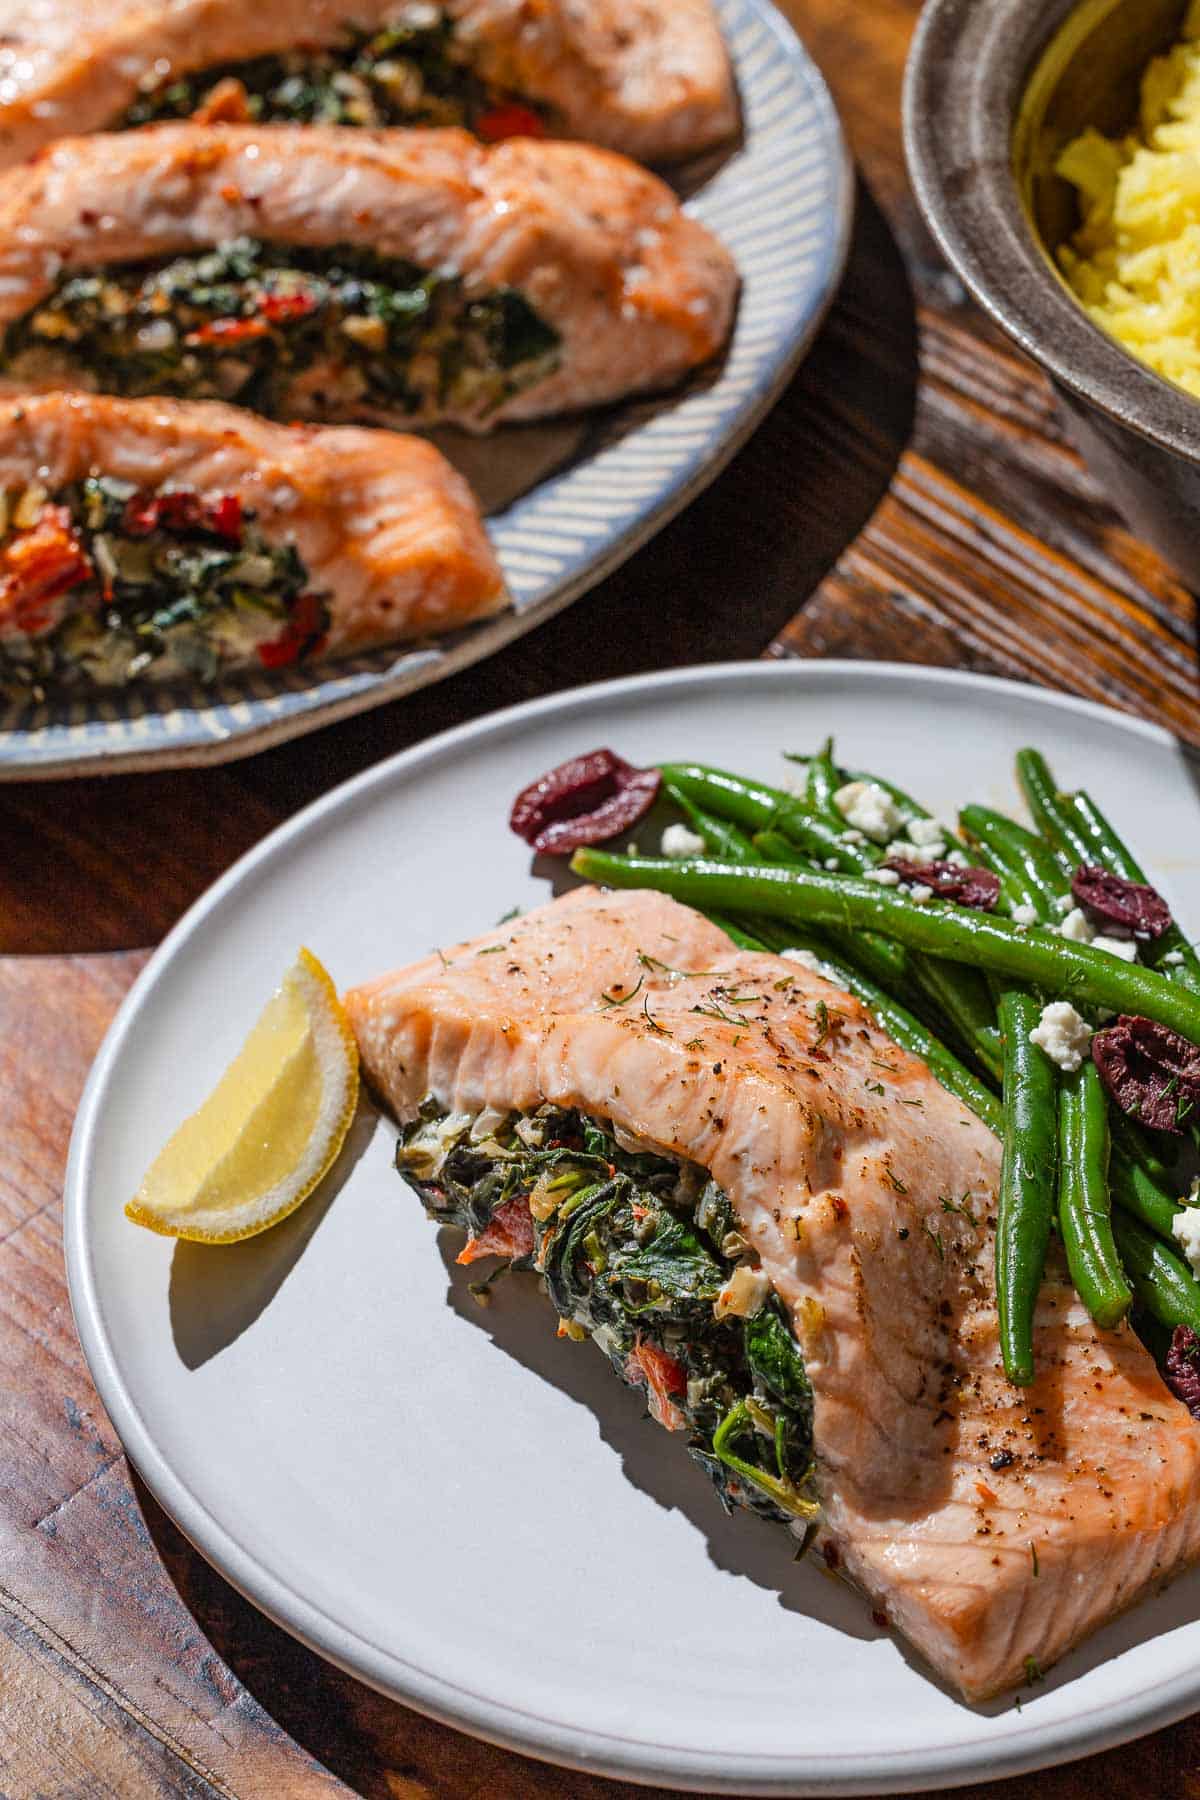 A stuffed salmon fillet on a plate with a serving of green beans, and a lemon wedge. This is next to a serving platter with the rest of the stuffed salmon and a bowl of rice.